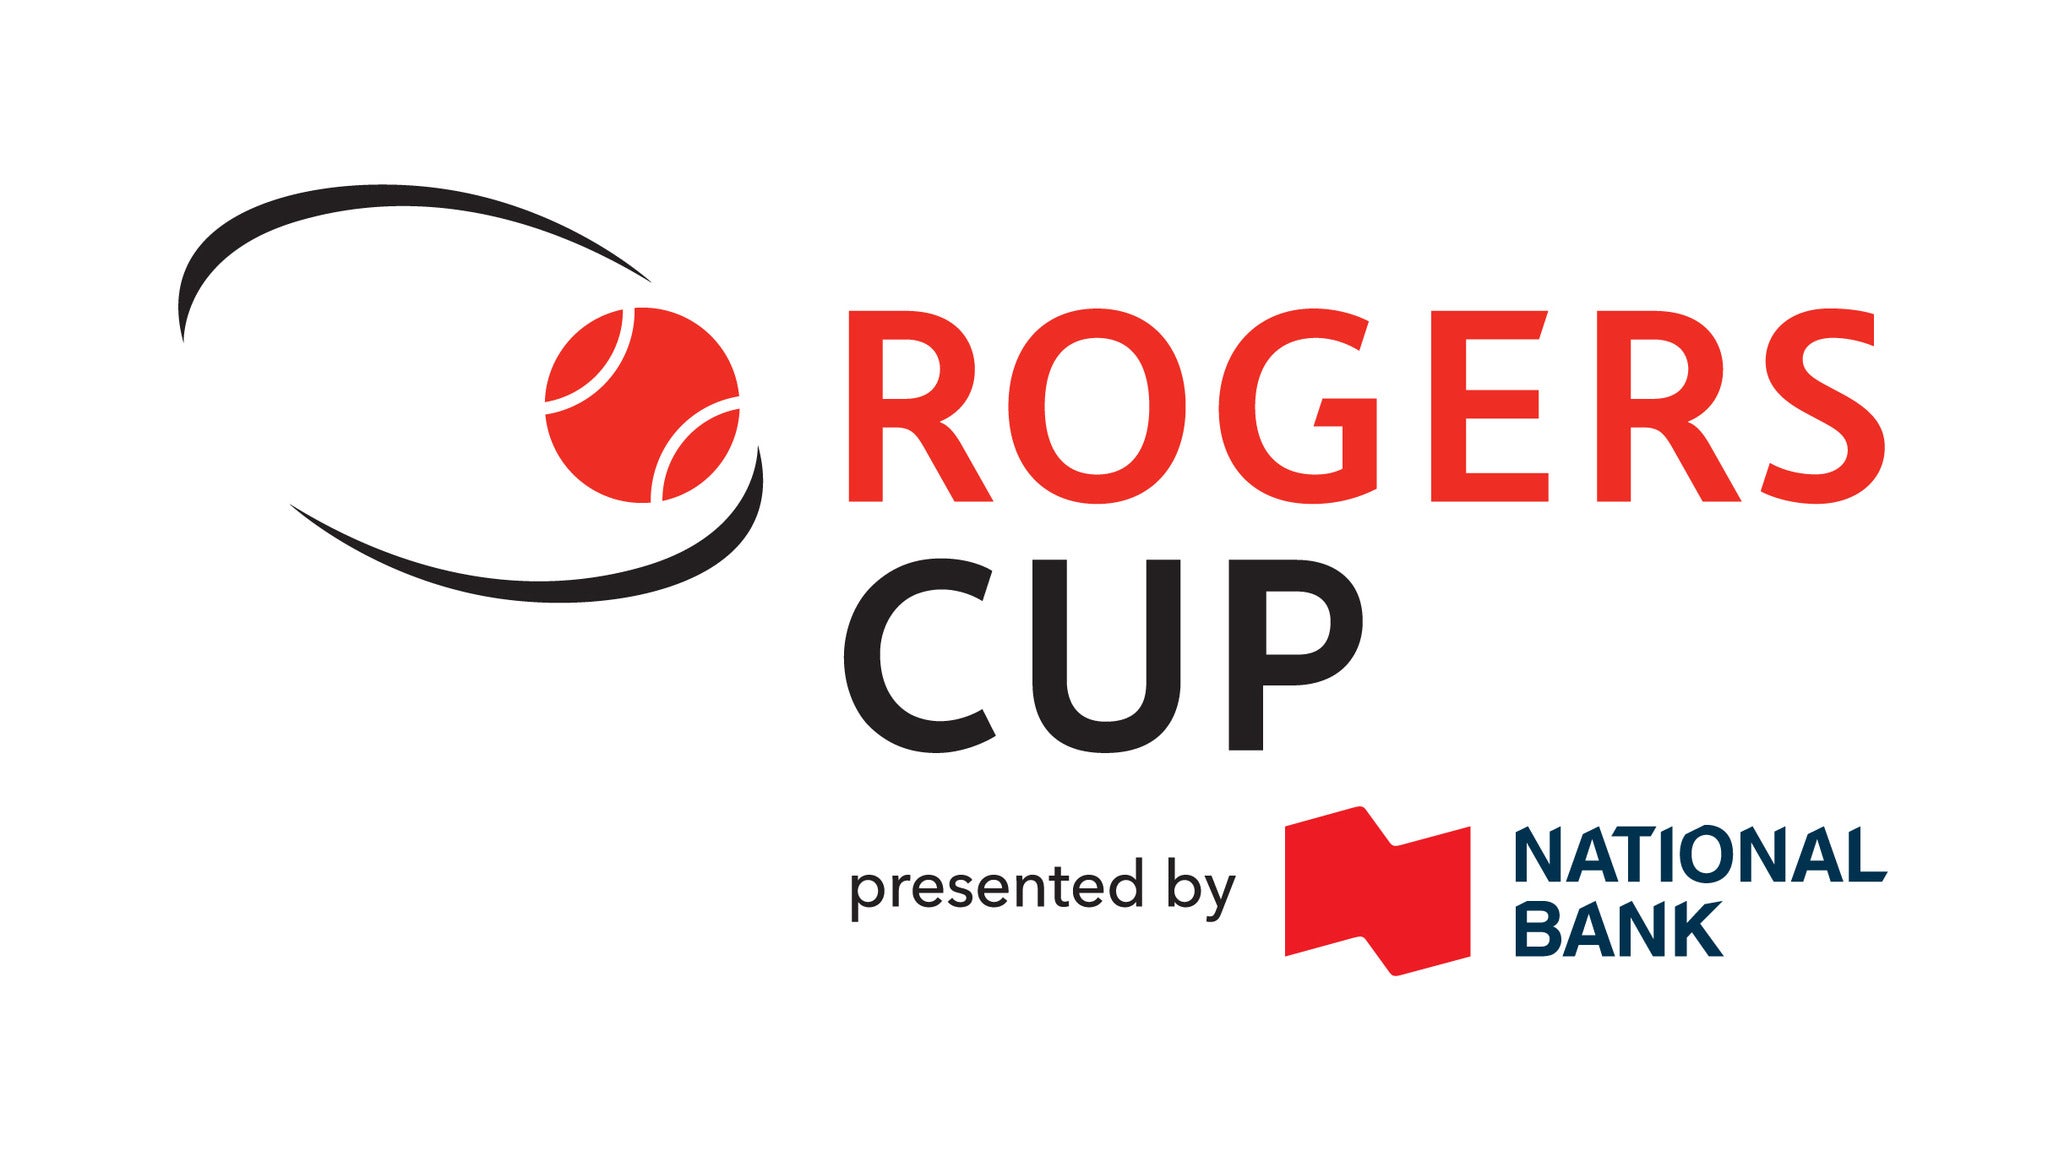 Rogers Cup (Toronto - WTA Women's Tennis) FINAL ROUND in Toronto promo photo for 2 For 1 presale offer code